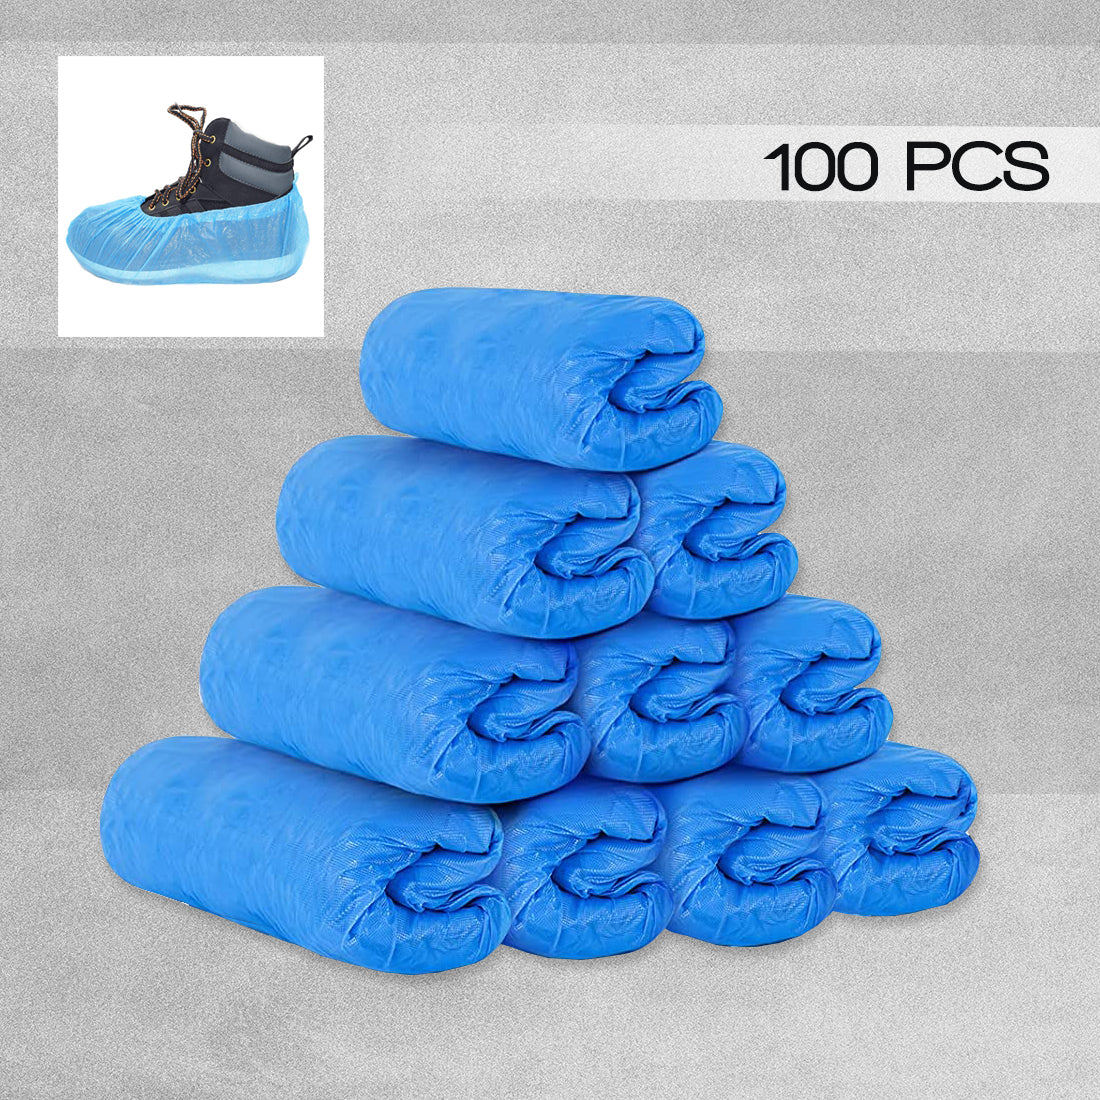 CPE 14" Disposable Plastic Overshoes - Pack of 100